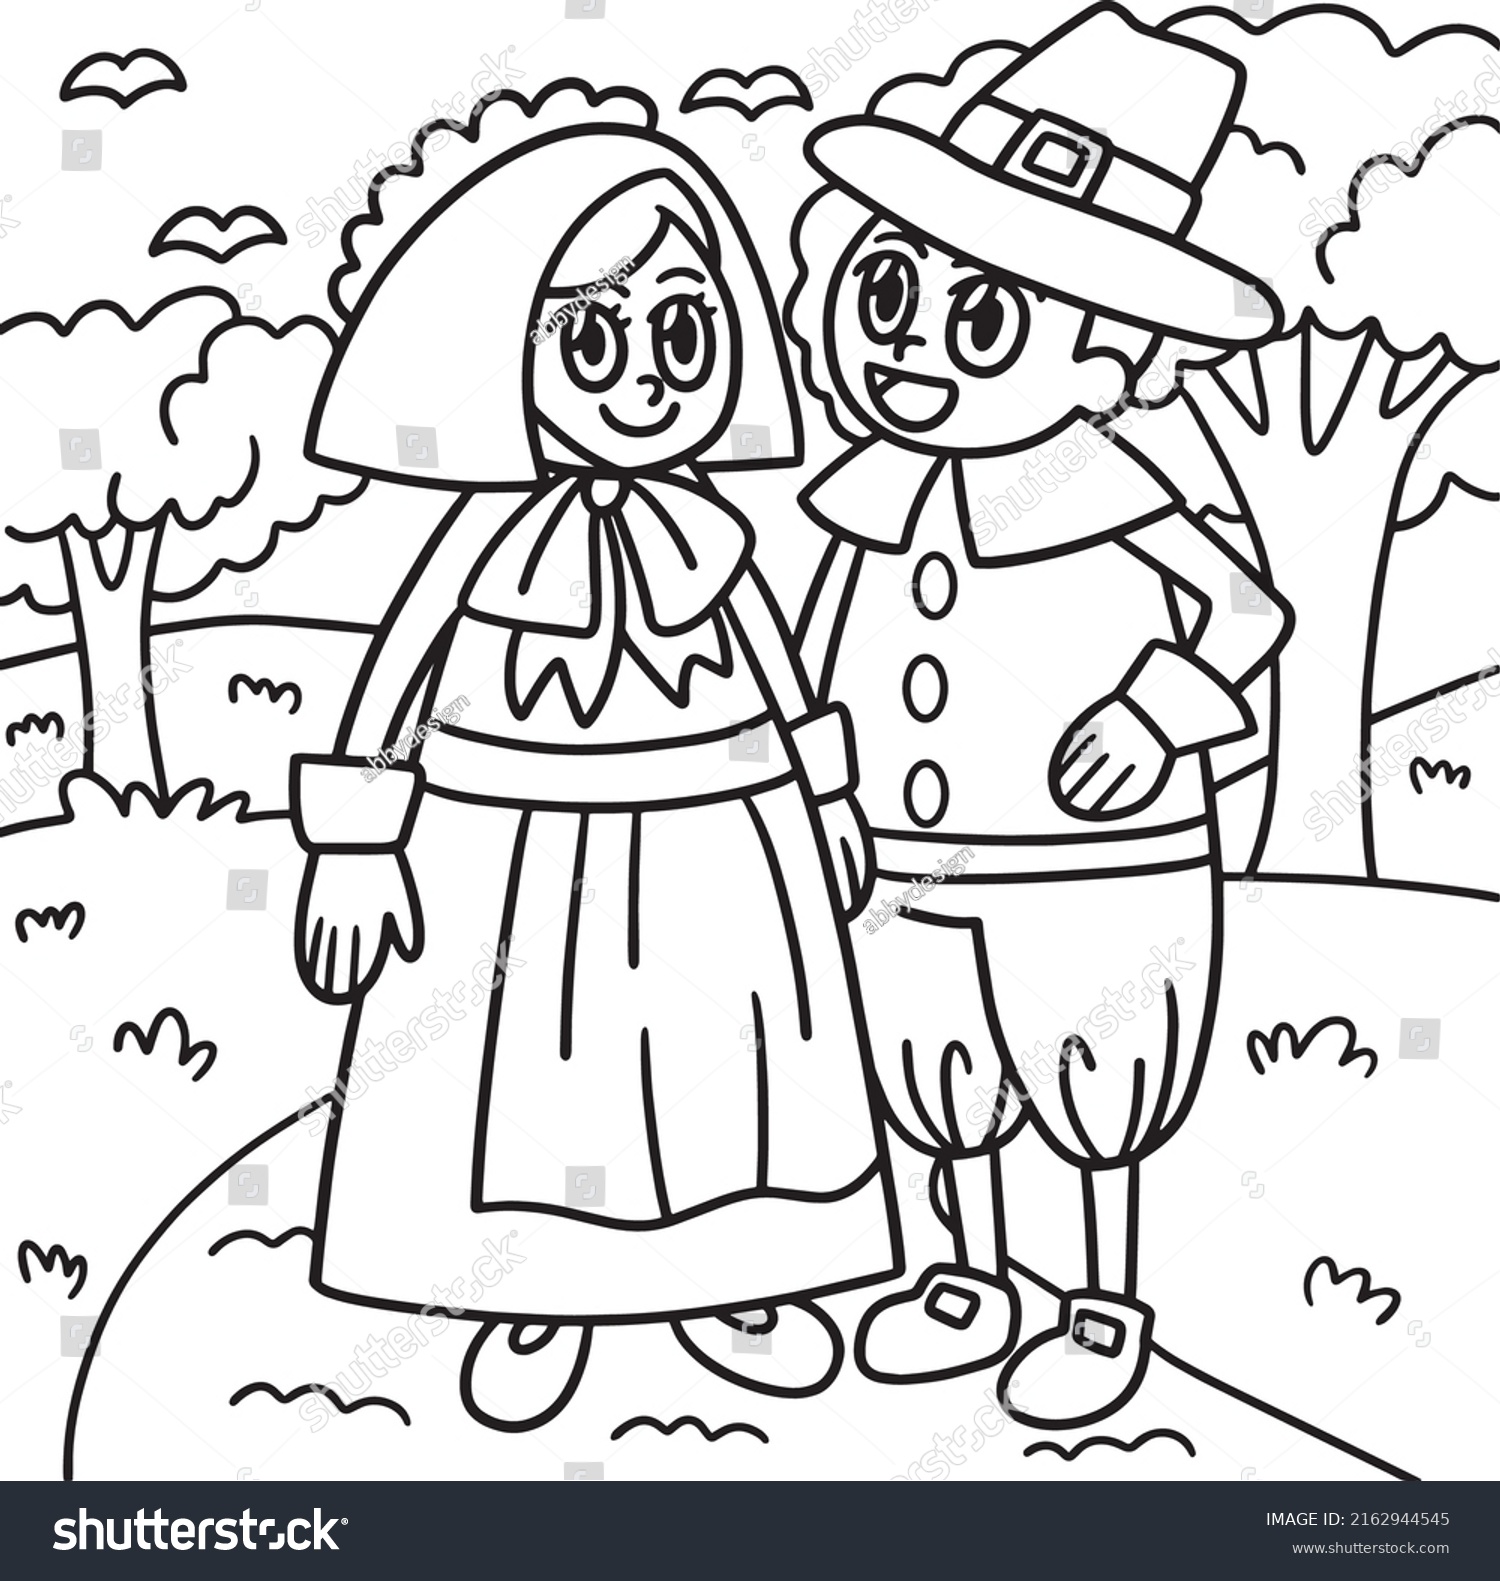 Thanksgiving pilgrim couple coloring page kids stock vector royalty free